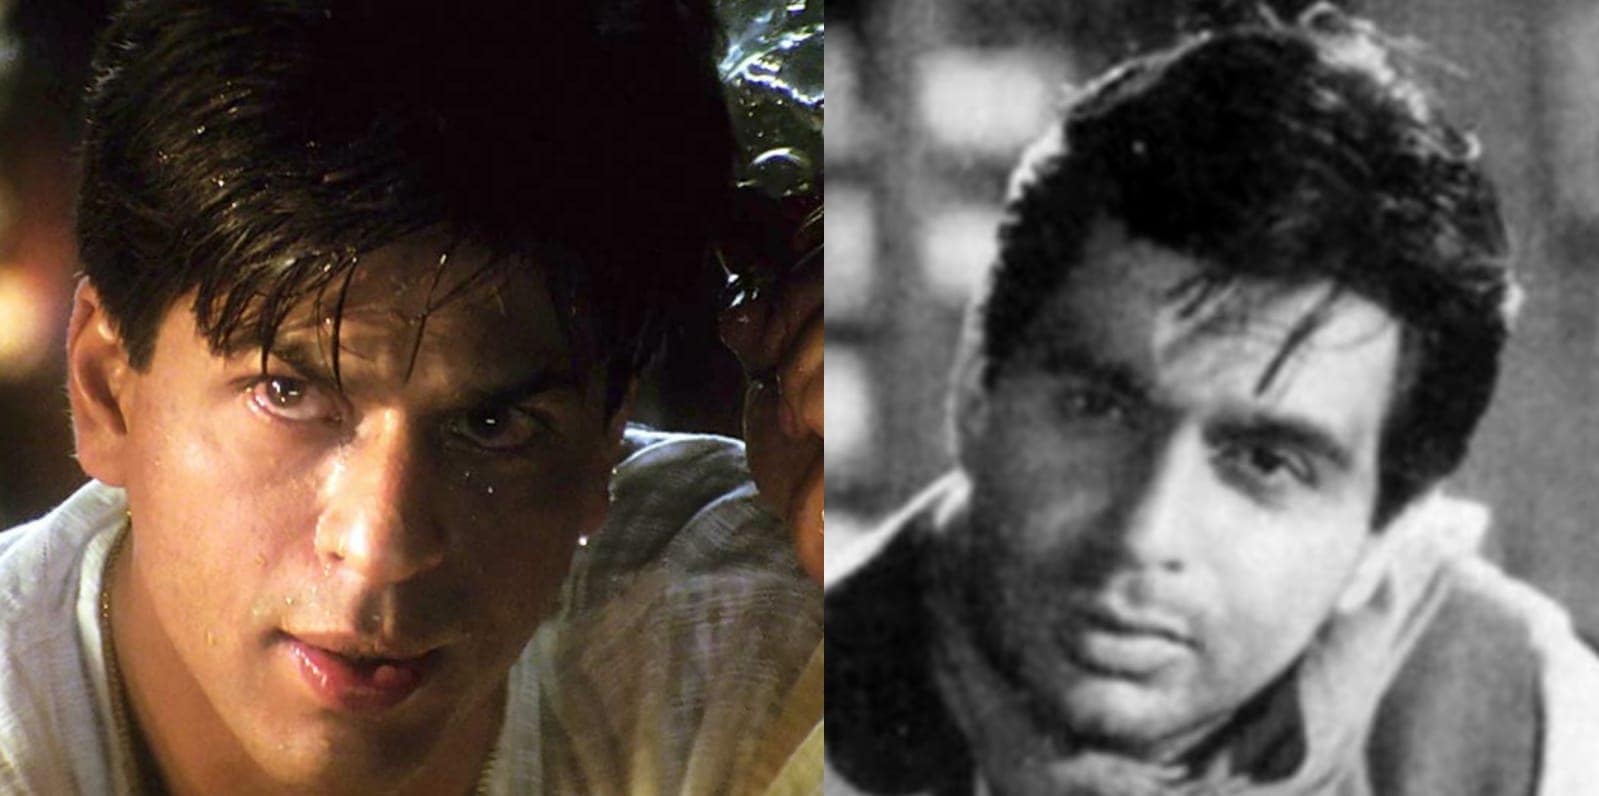 While the benchmark set for Devdas by Dilip Kumar may be unattainable, Shah Rukh Khan did come close.